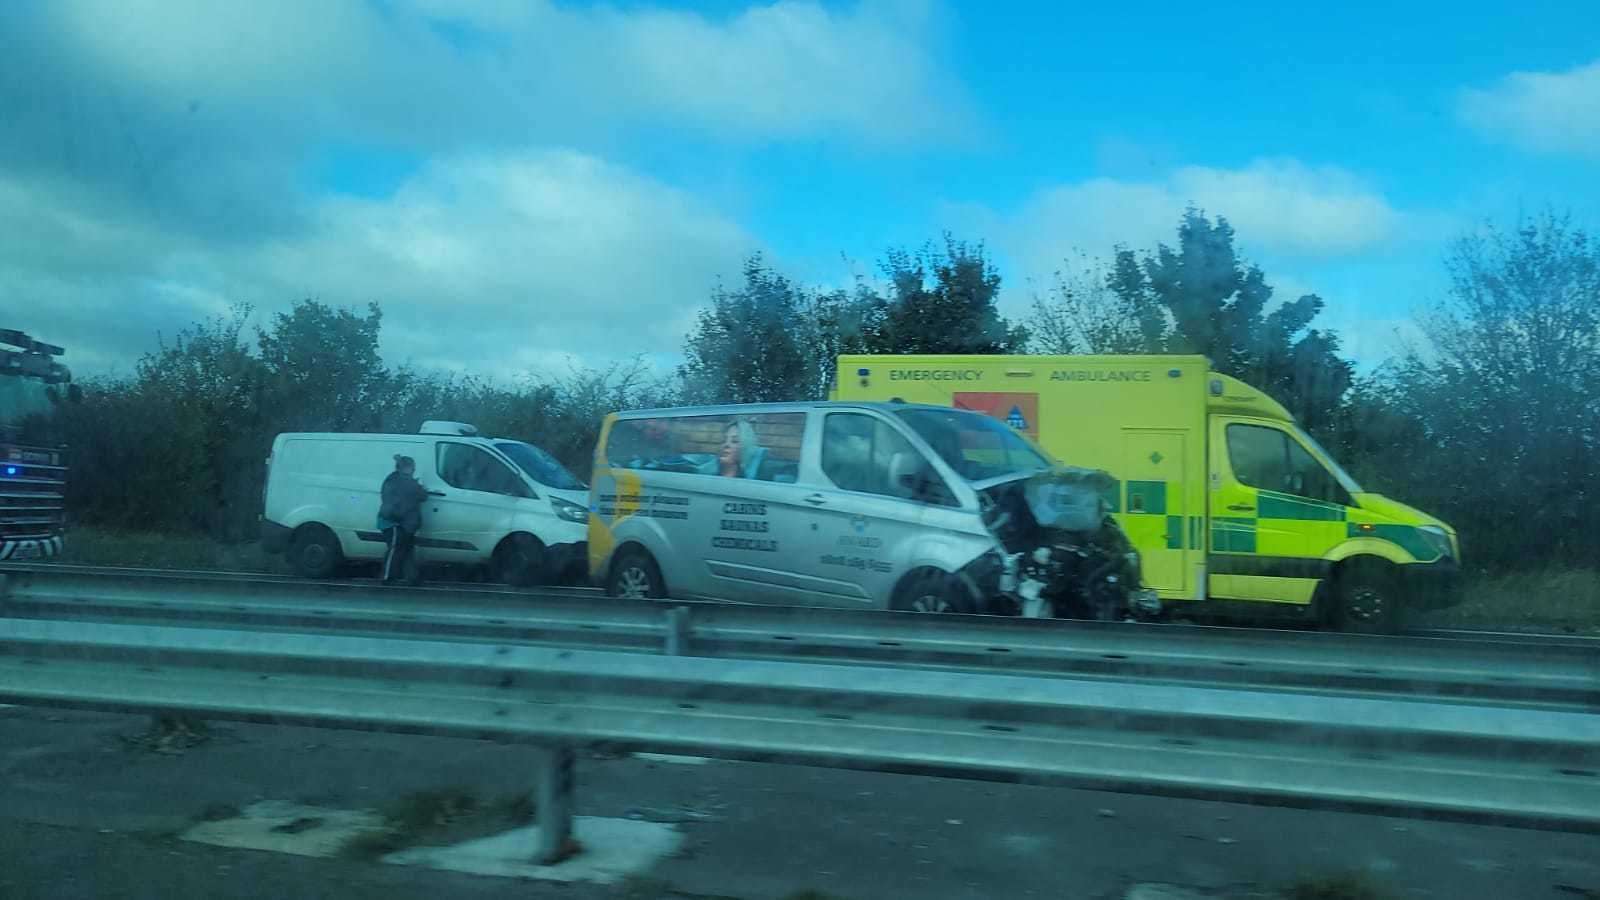 A van has been involved in the crash